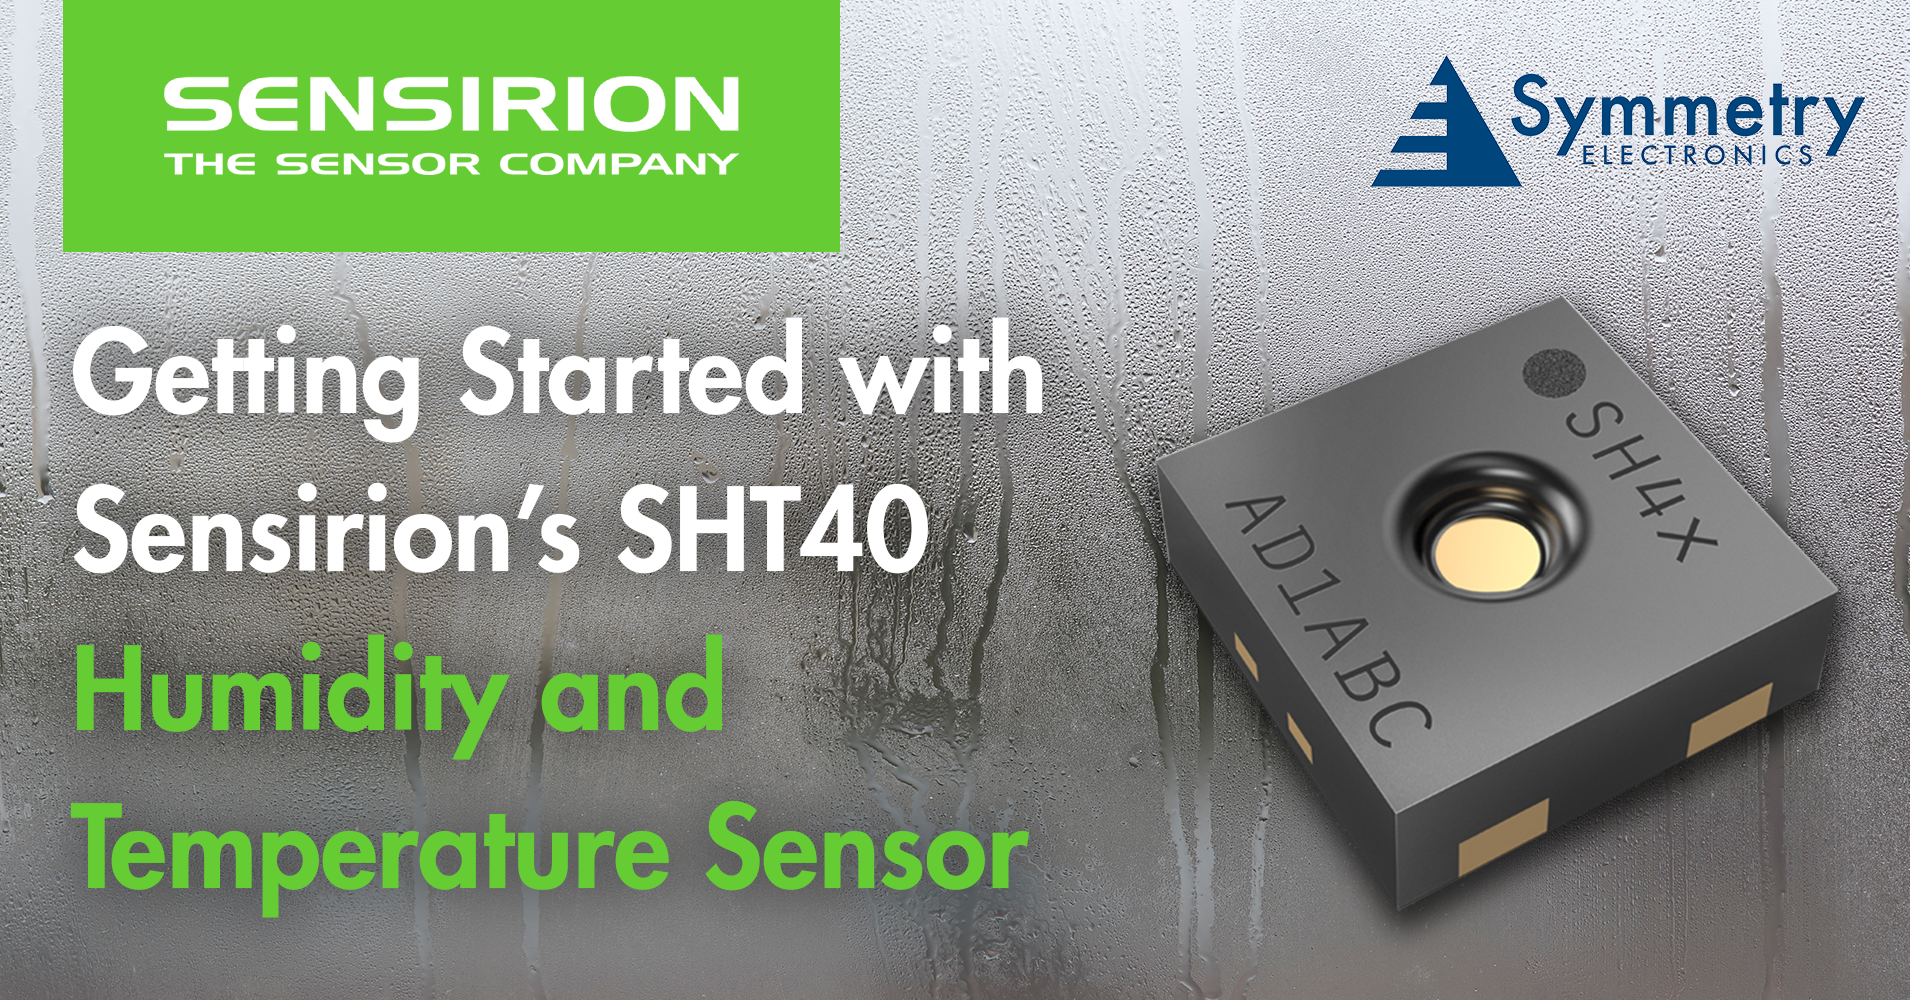 Symmetry-Electronics'-Knowledgeable-Applications-Engineer-Explains-How-To-Begin-Evaluating-Sensirion's-SHT40-Temperature-And-Humidity-Sensor